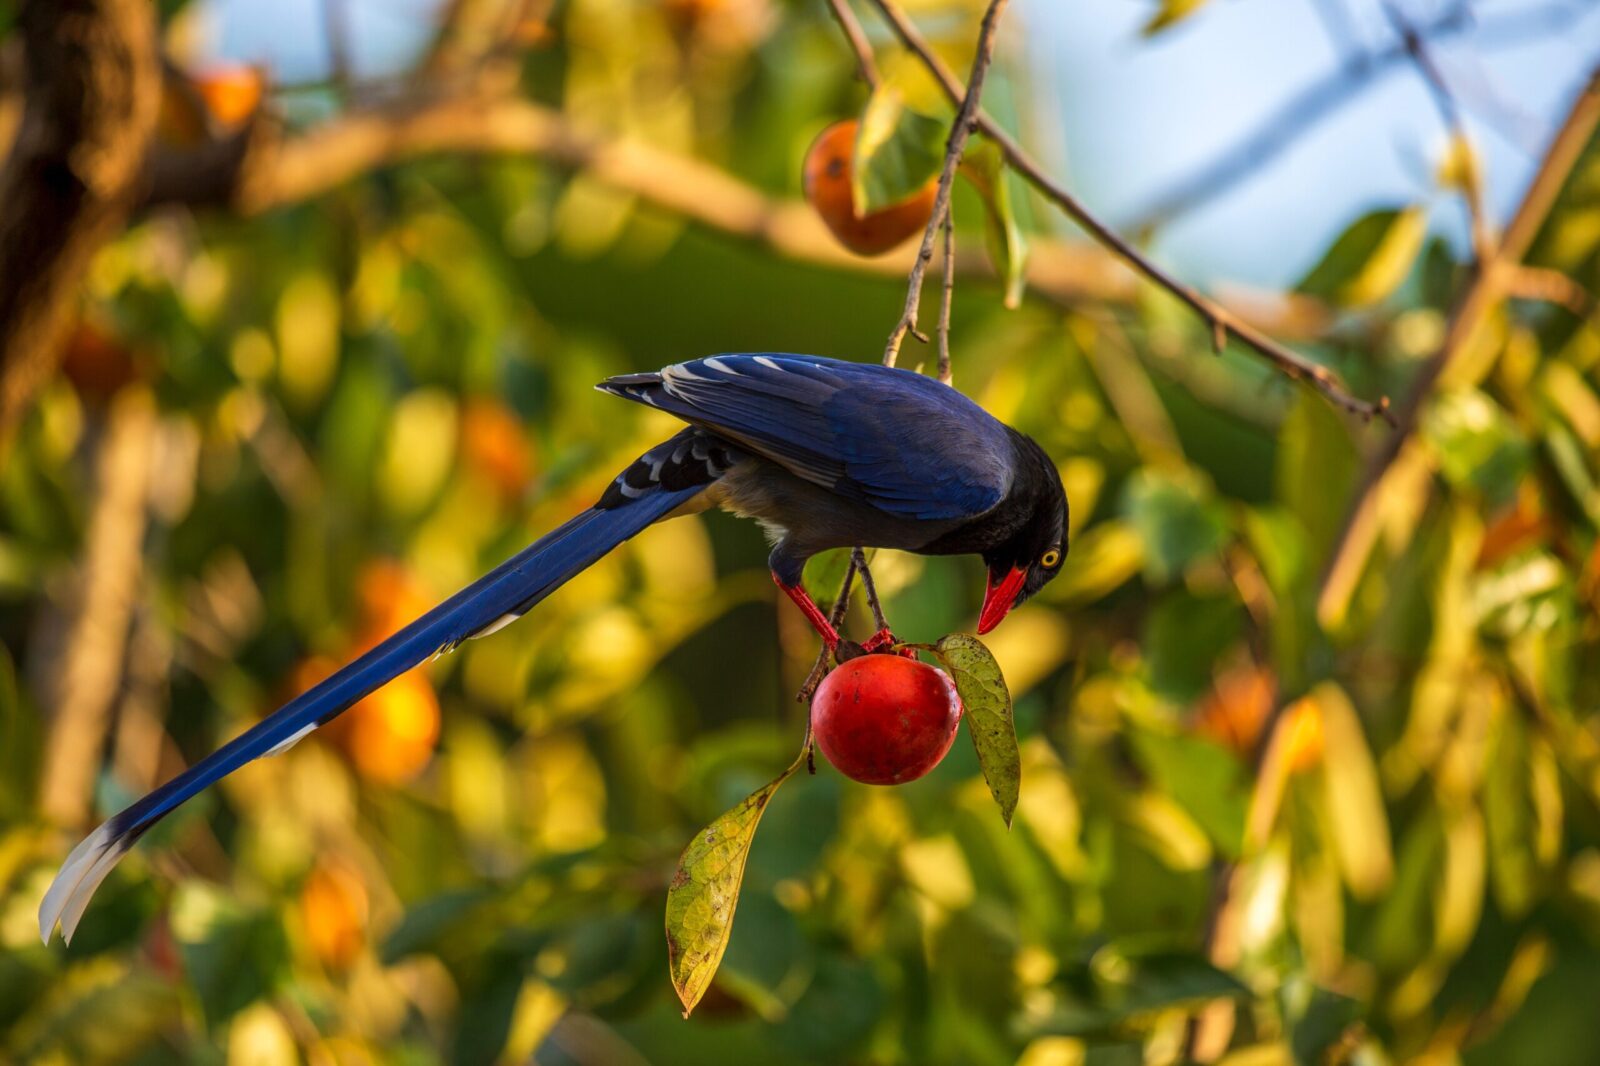 The Magpie Bird And Parrot's Family In a Berries Tree Forest